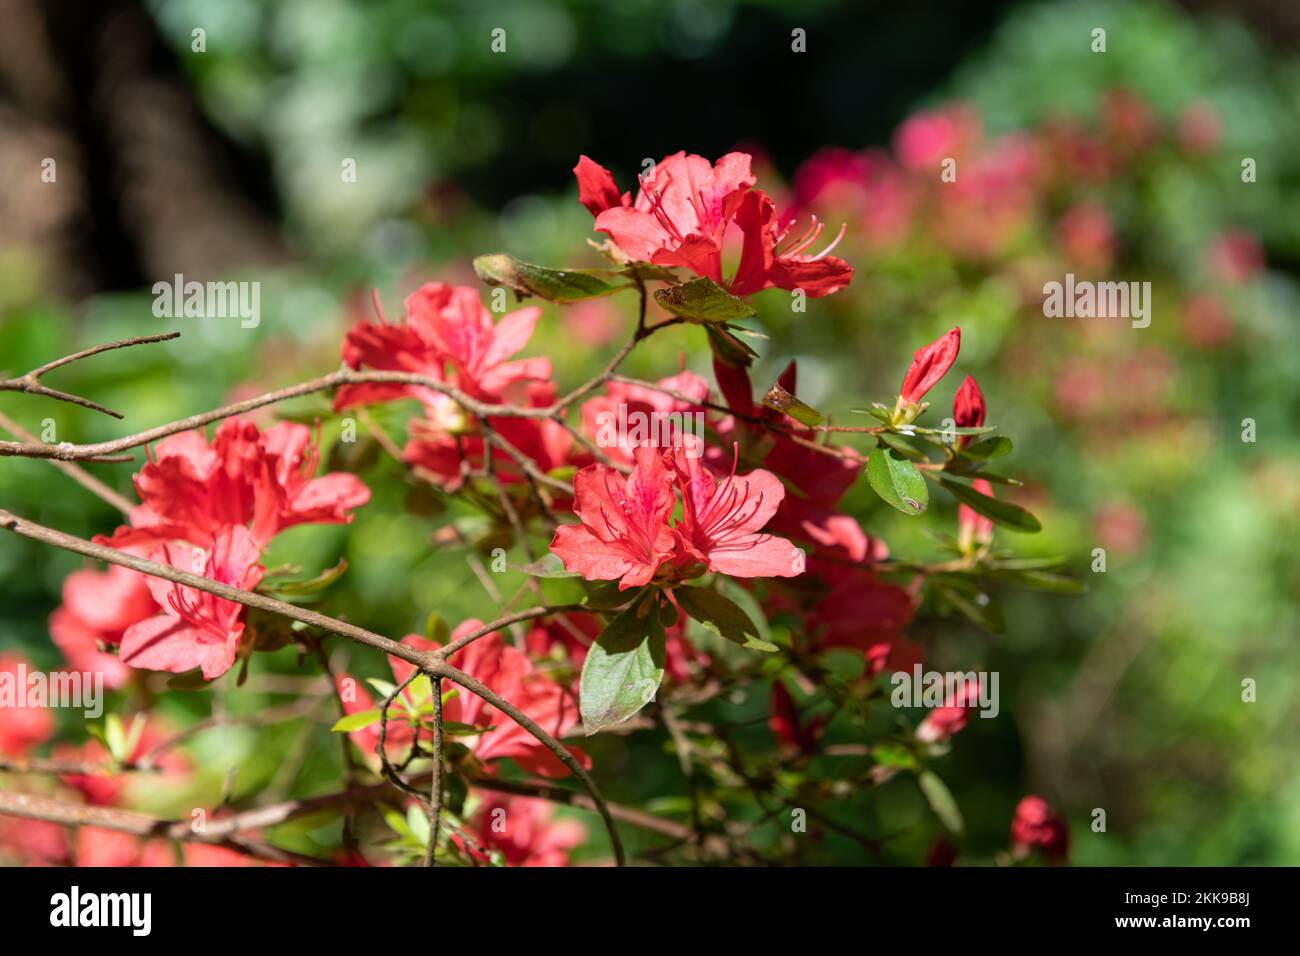 Close up of red early azalea (rhododendron prinophyllum) flowers in bloom Stock Photo